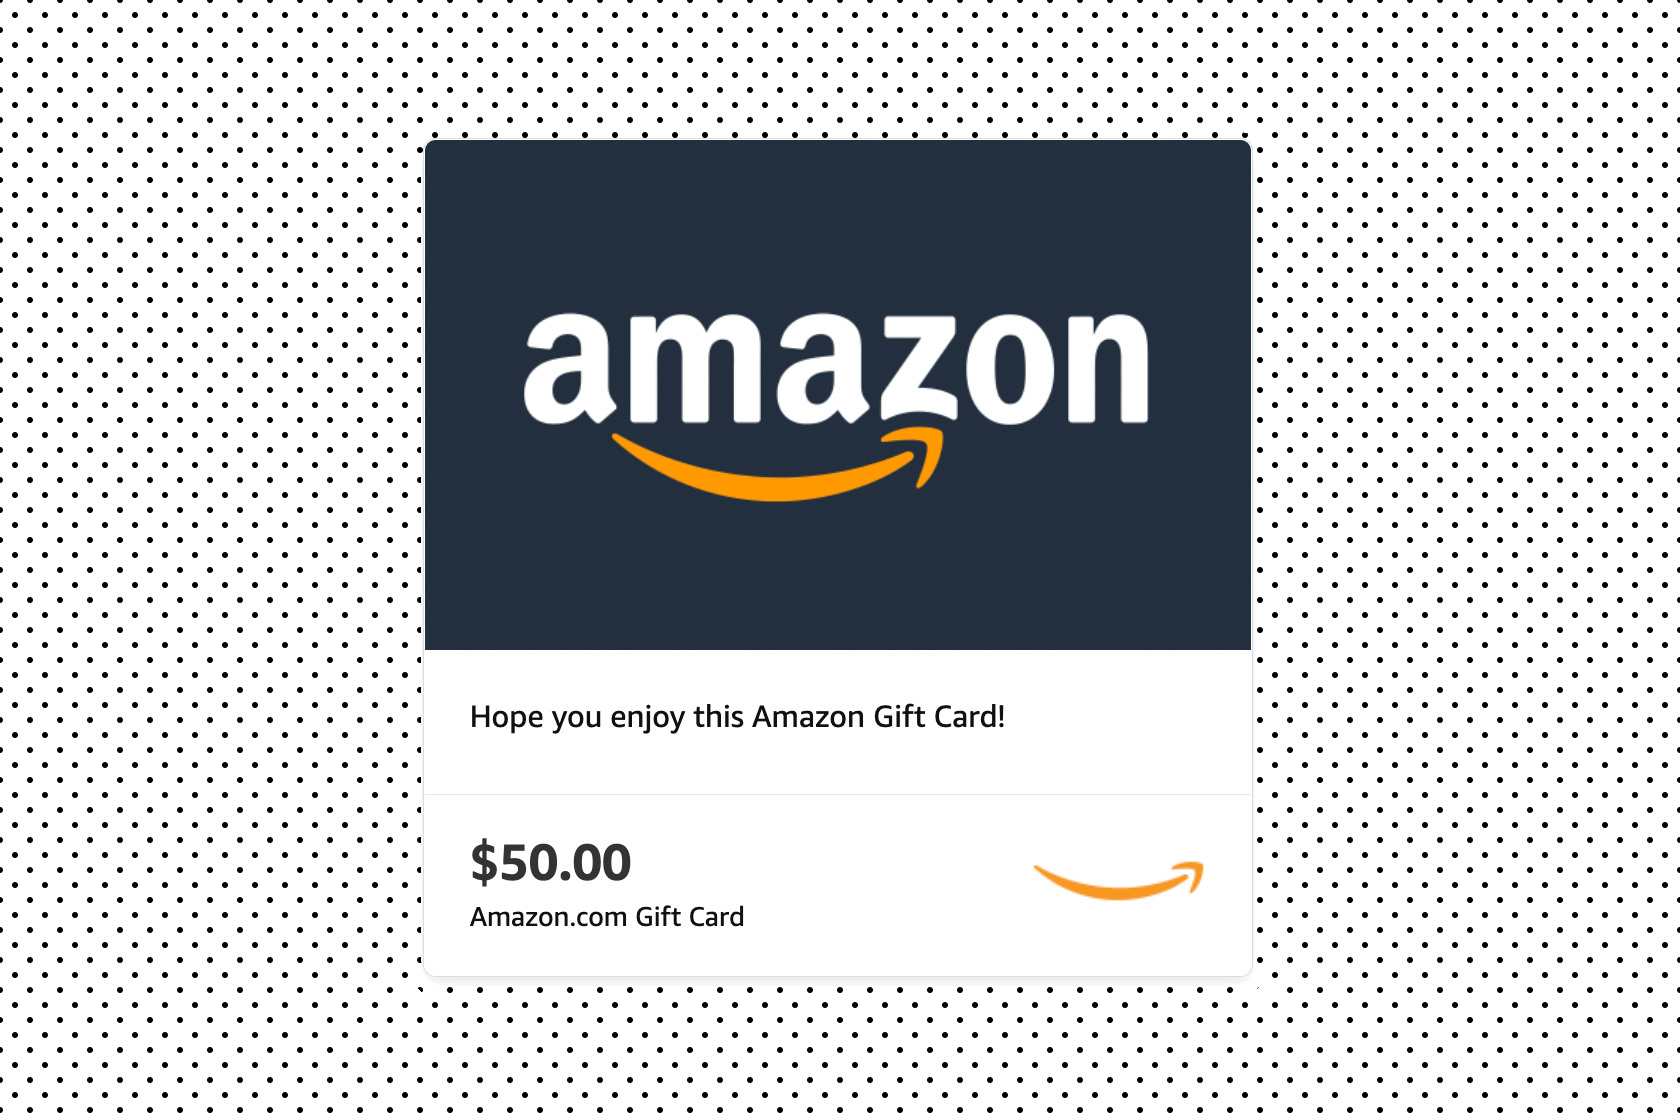 amazon-is-handing-out-10-when-you-buy-a-gift-card-during-prime-early